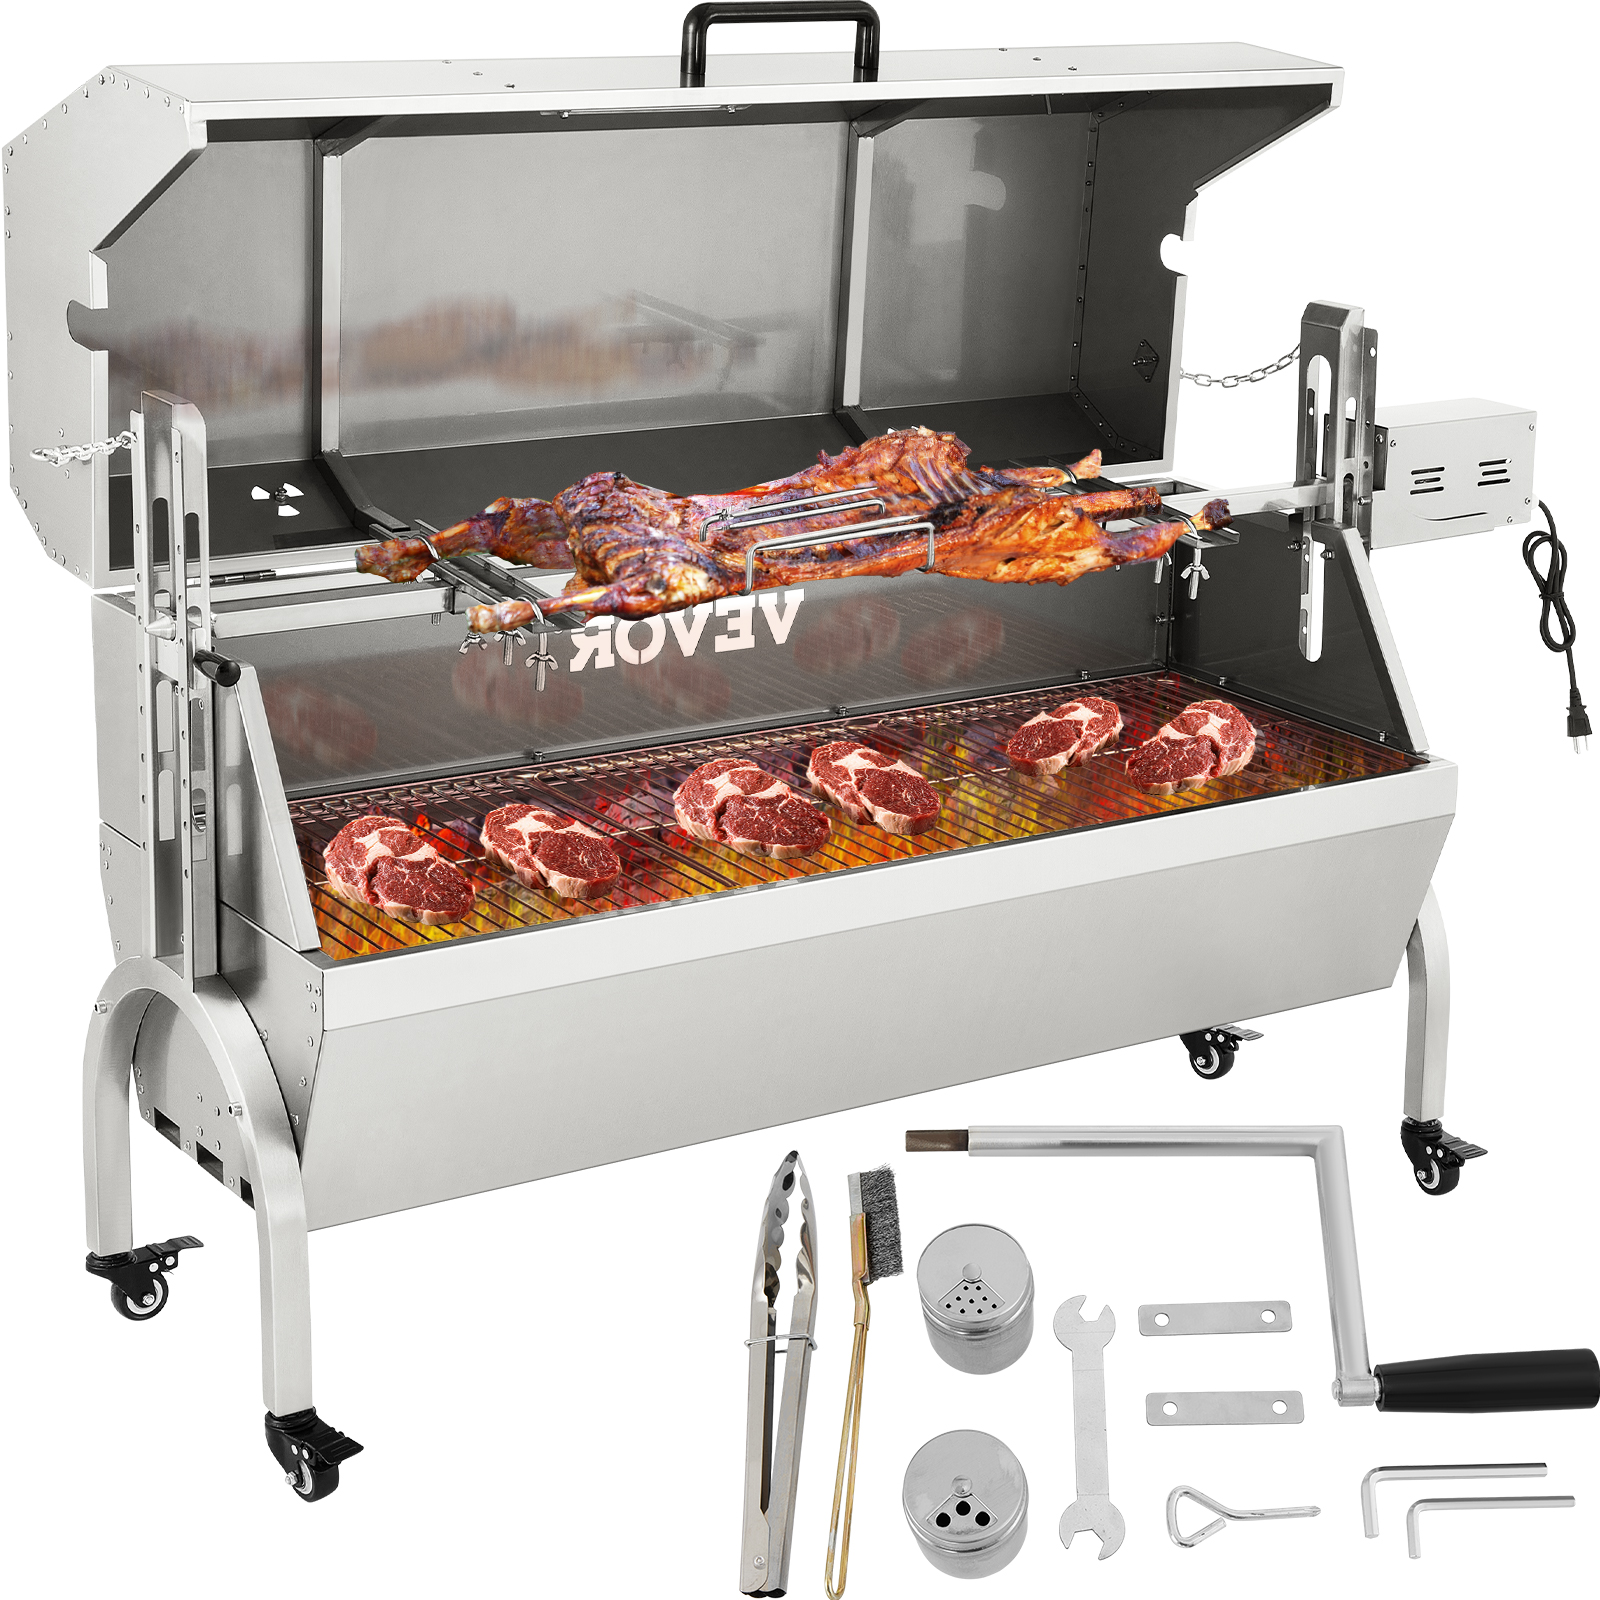 VEVOR 132 LBS Rotisserie Grill Stainless Steel Pig Lamb Hooded 50" Electric Charcoal Spit with 40W Motor & Adjustable Height Casters for Outdoor Camping Party Barbecue, Silver | VEVOR US